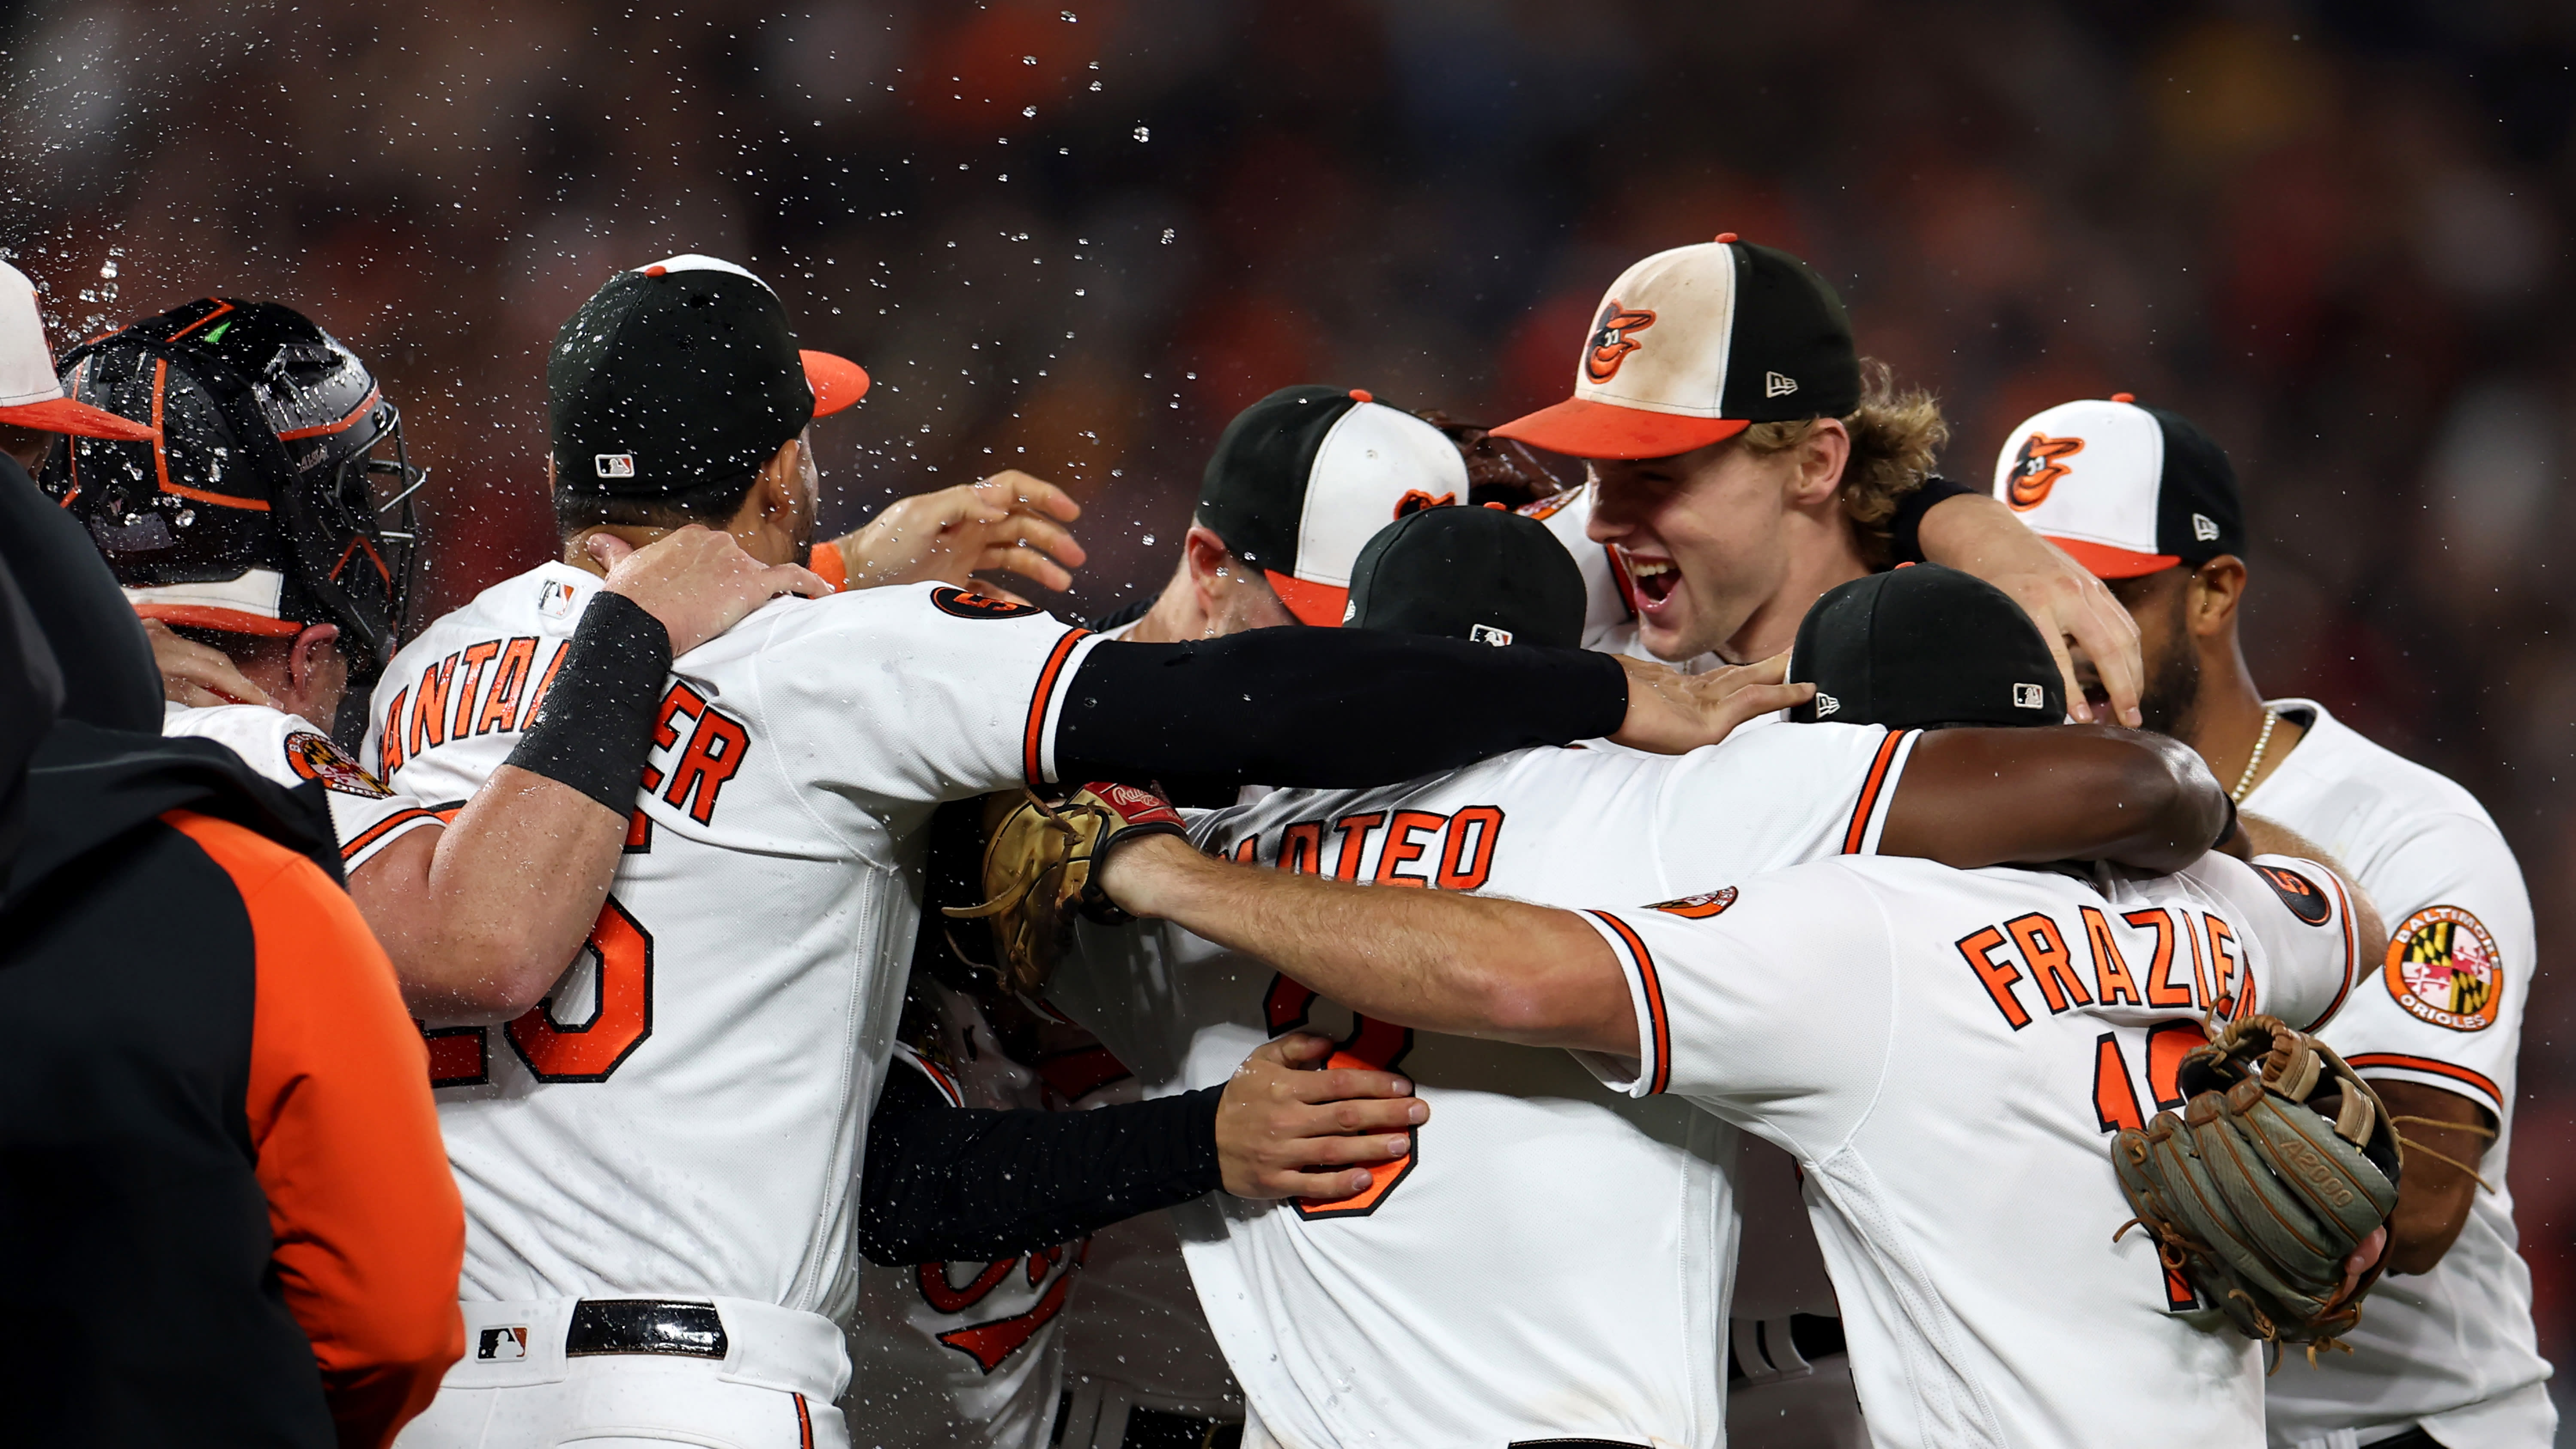 The Orioles celebrate after clinching the AL West title